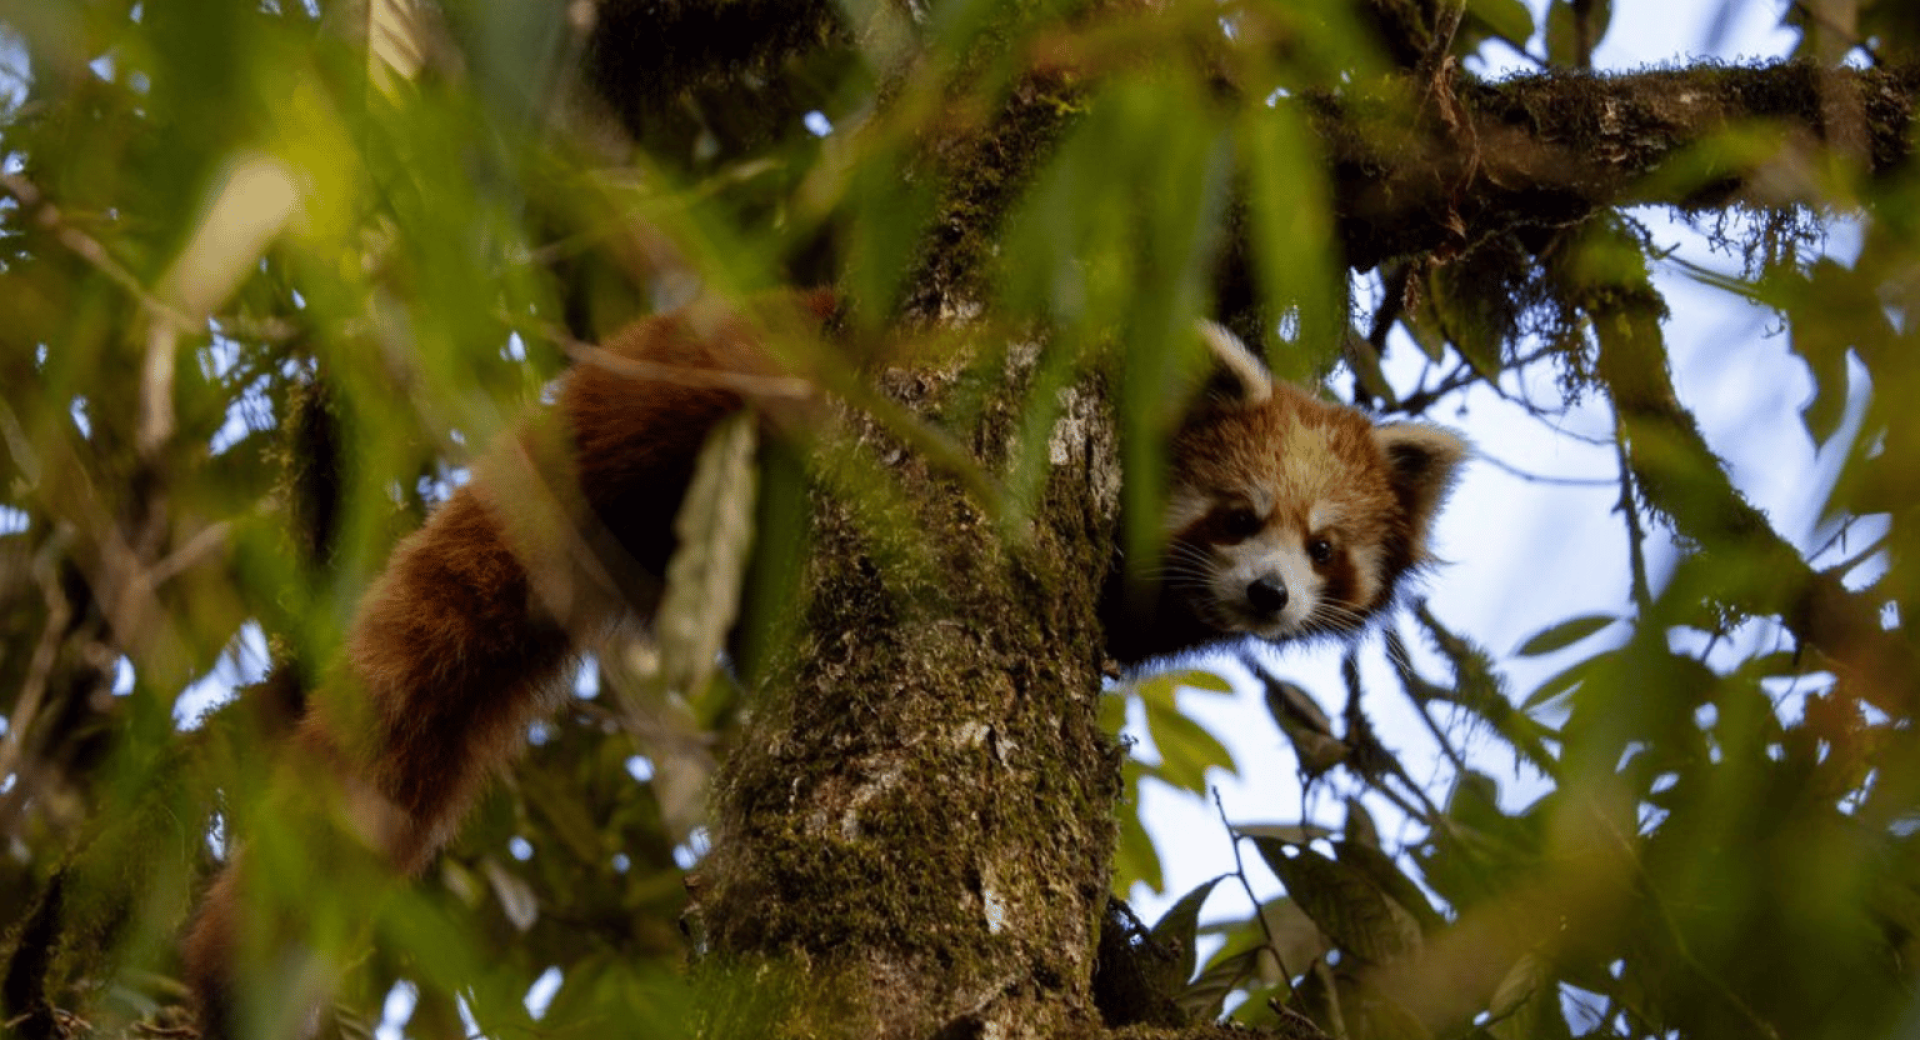 Expanding the Frontiers of Red Panda Conservation